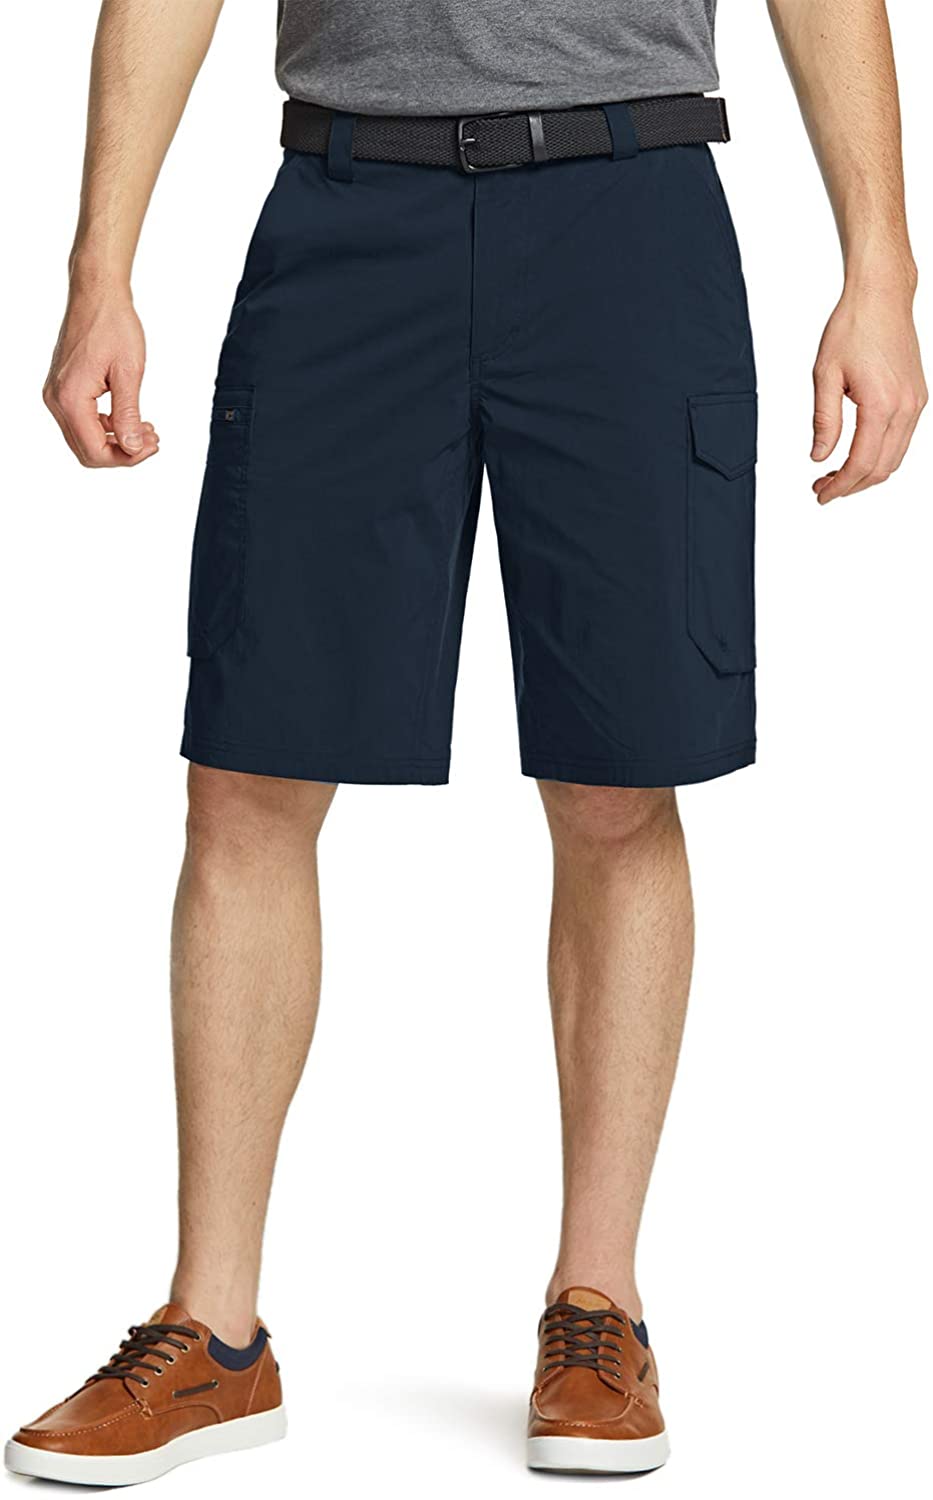 Outdoor Stretch Multi-Pocket Cargo Shorts CQR Mens On-The-Go Cargo Shorts Lightweight Relaxed Fit Casual Shorts